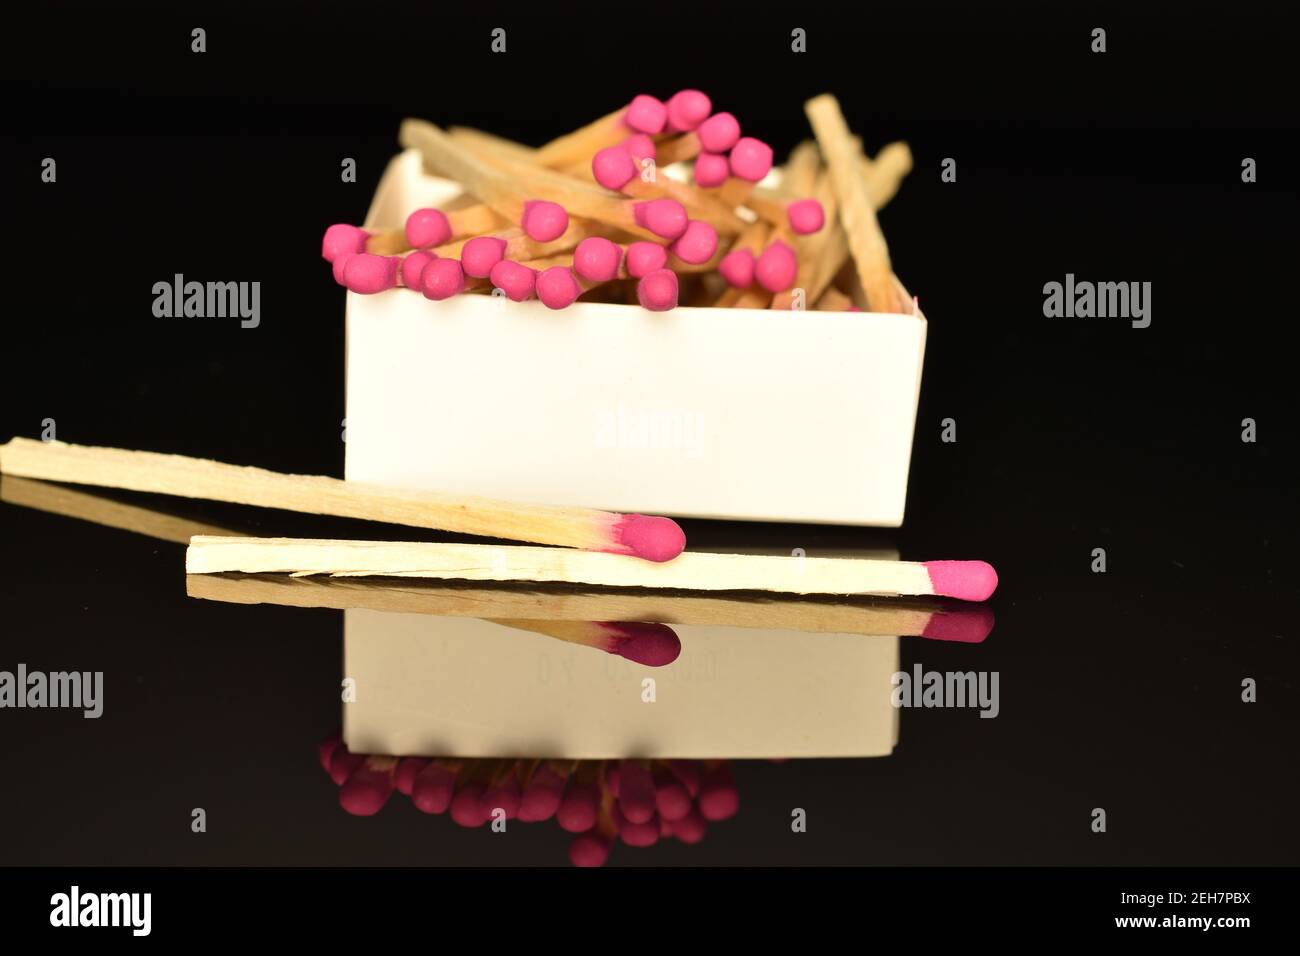 Close-up Macro of Pink Wood Stick Matches in a Box Stock Image - Image of  light, background: 71105929